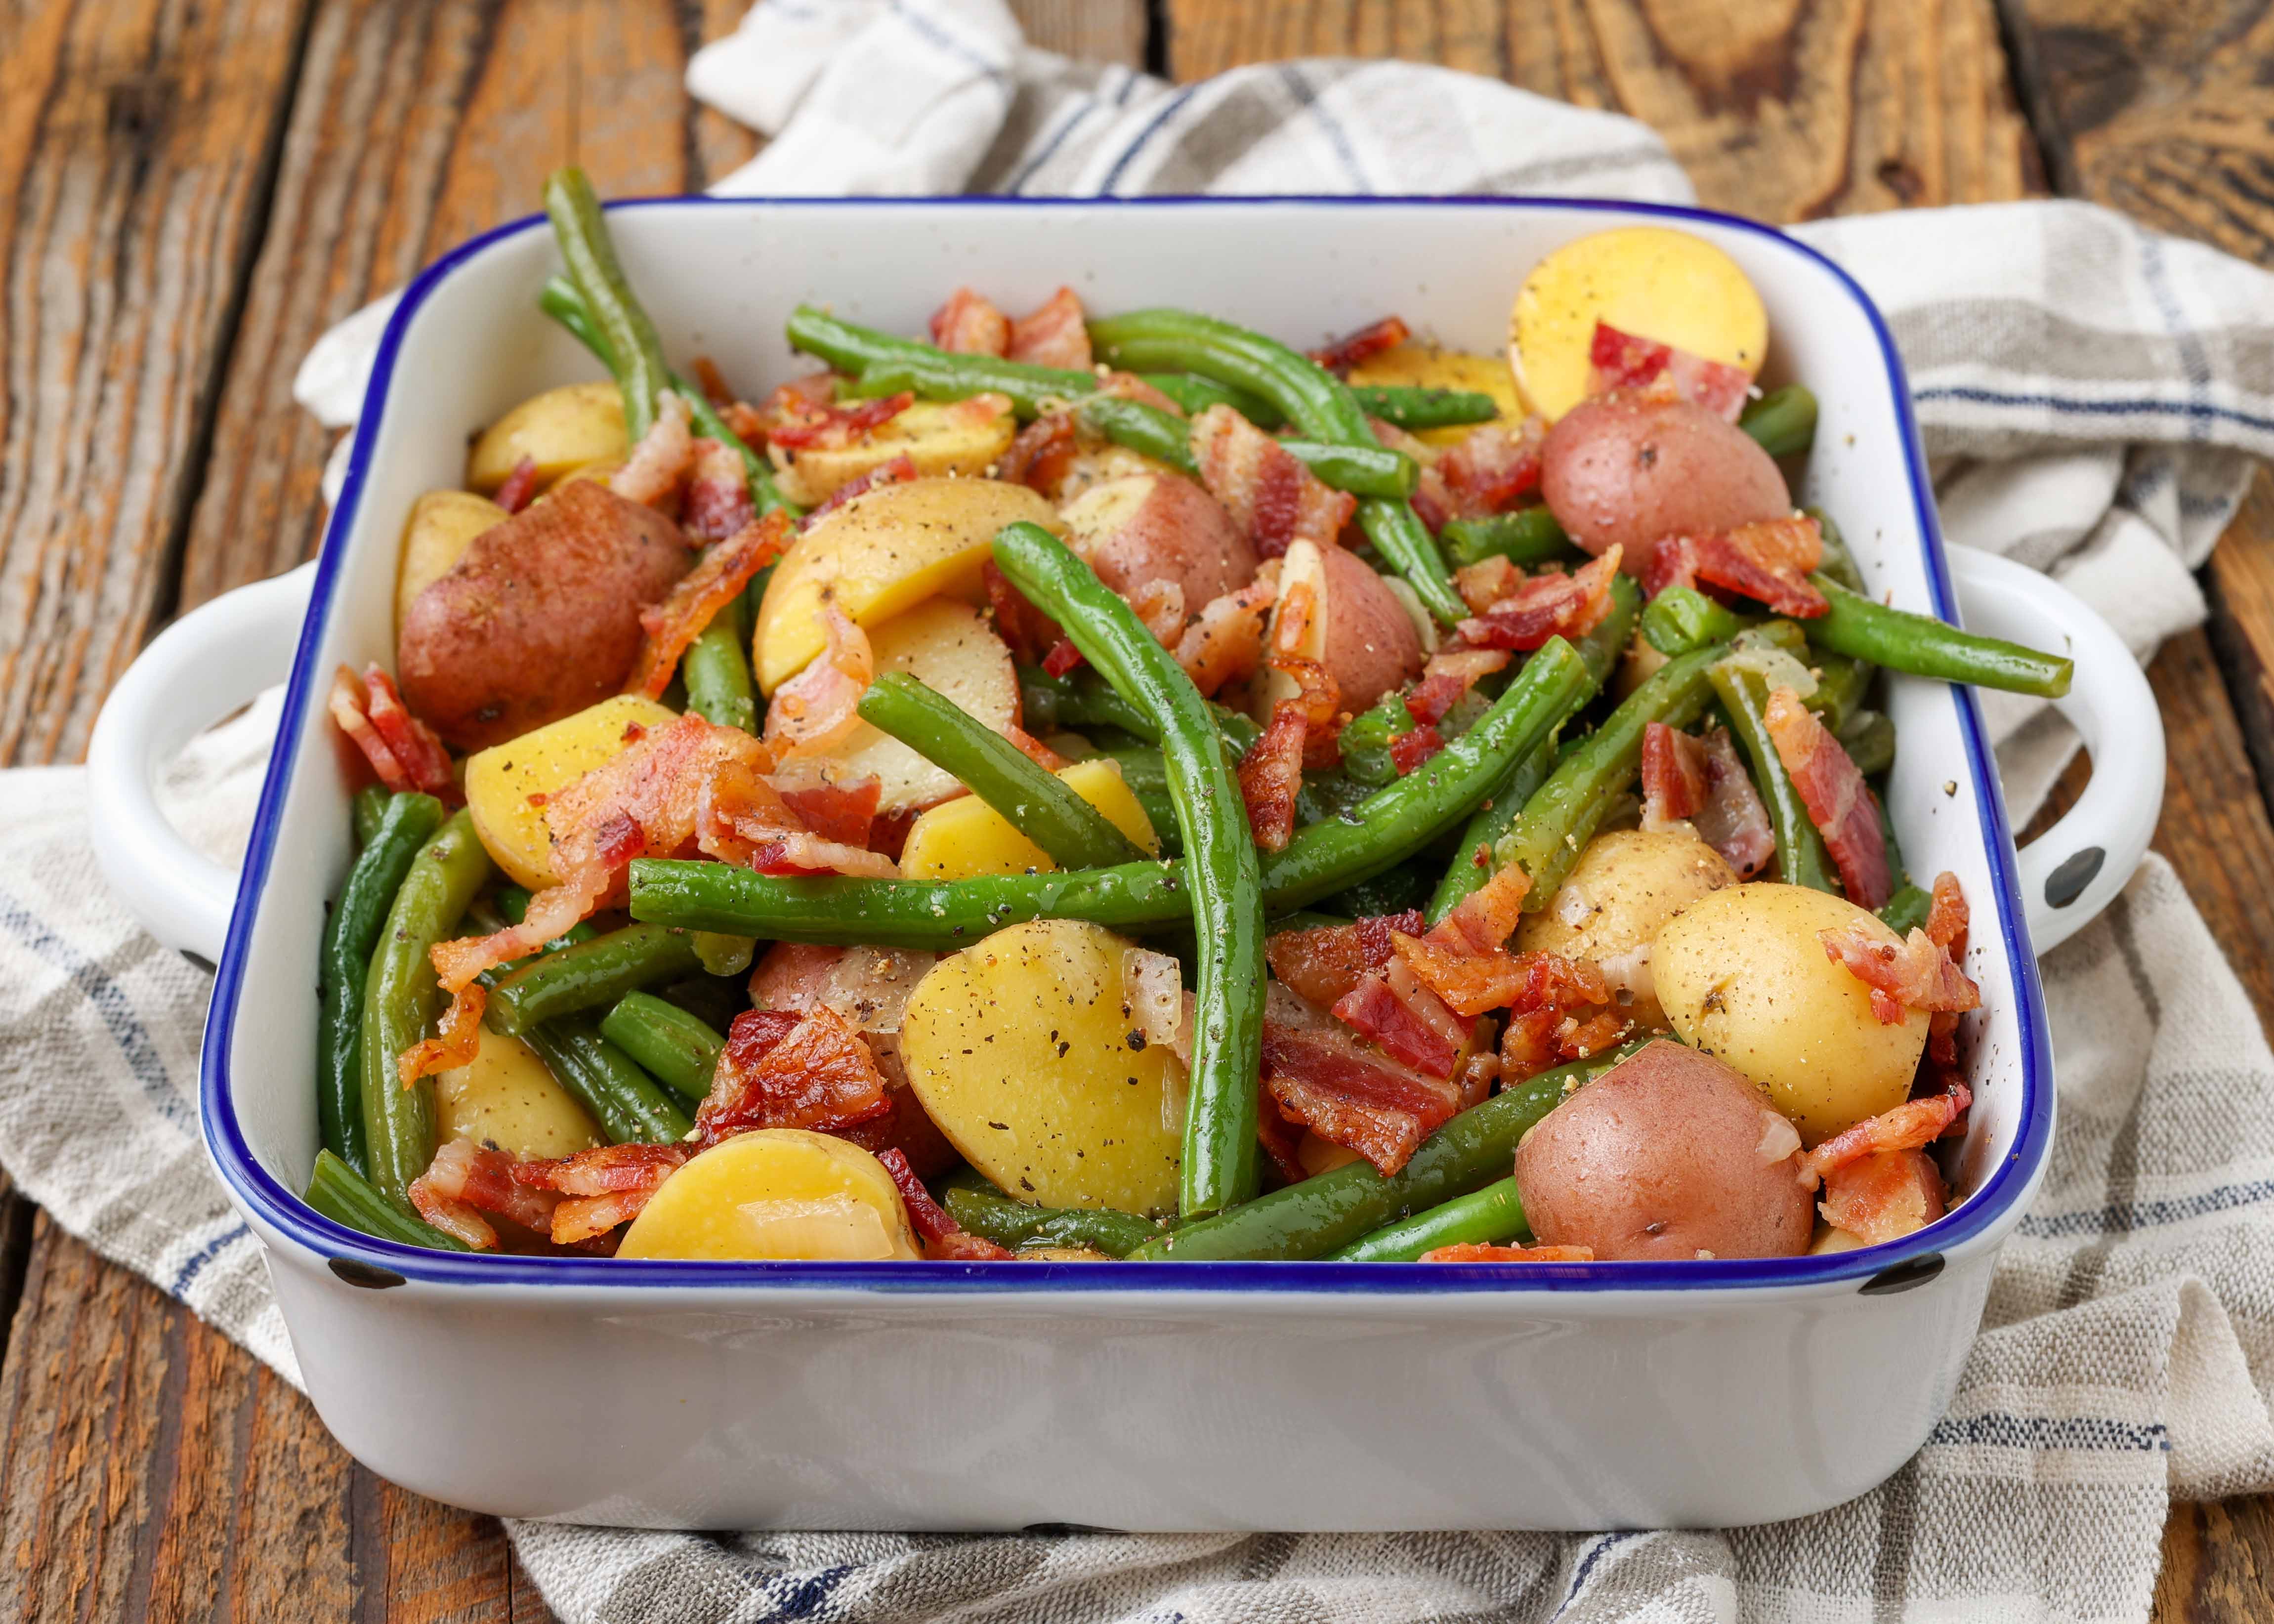 https://barefeetinthekitchen.com/wp-content/uploads/2022/09/Southern-Green-Beans-with-Potatoes-BFK-3-1-of-1.jpg